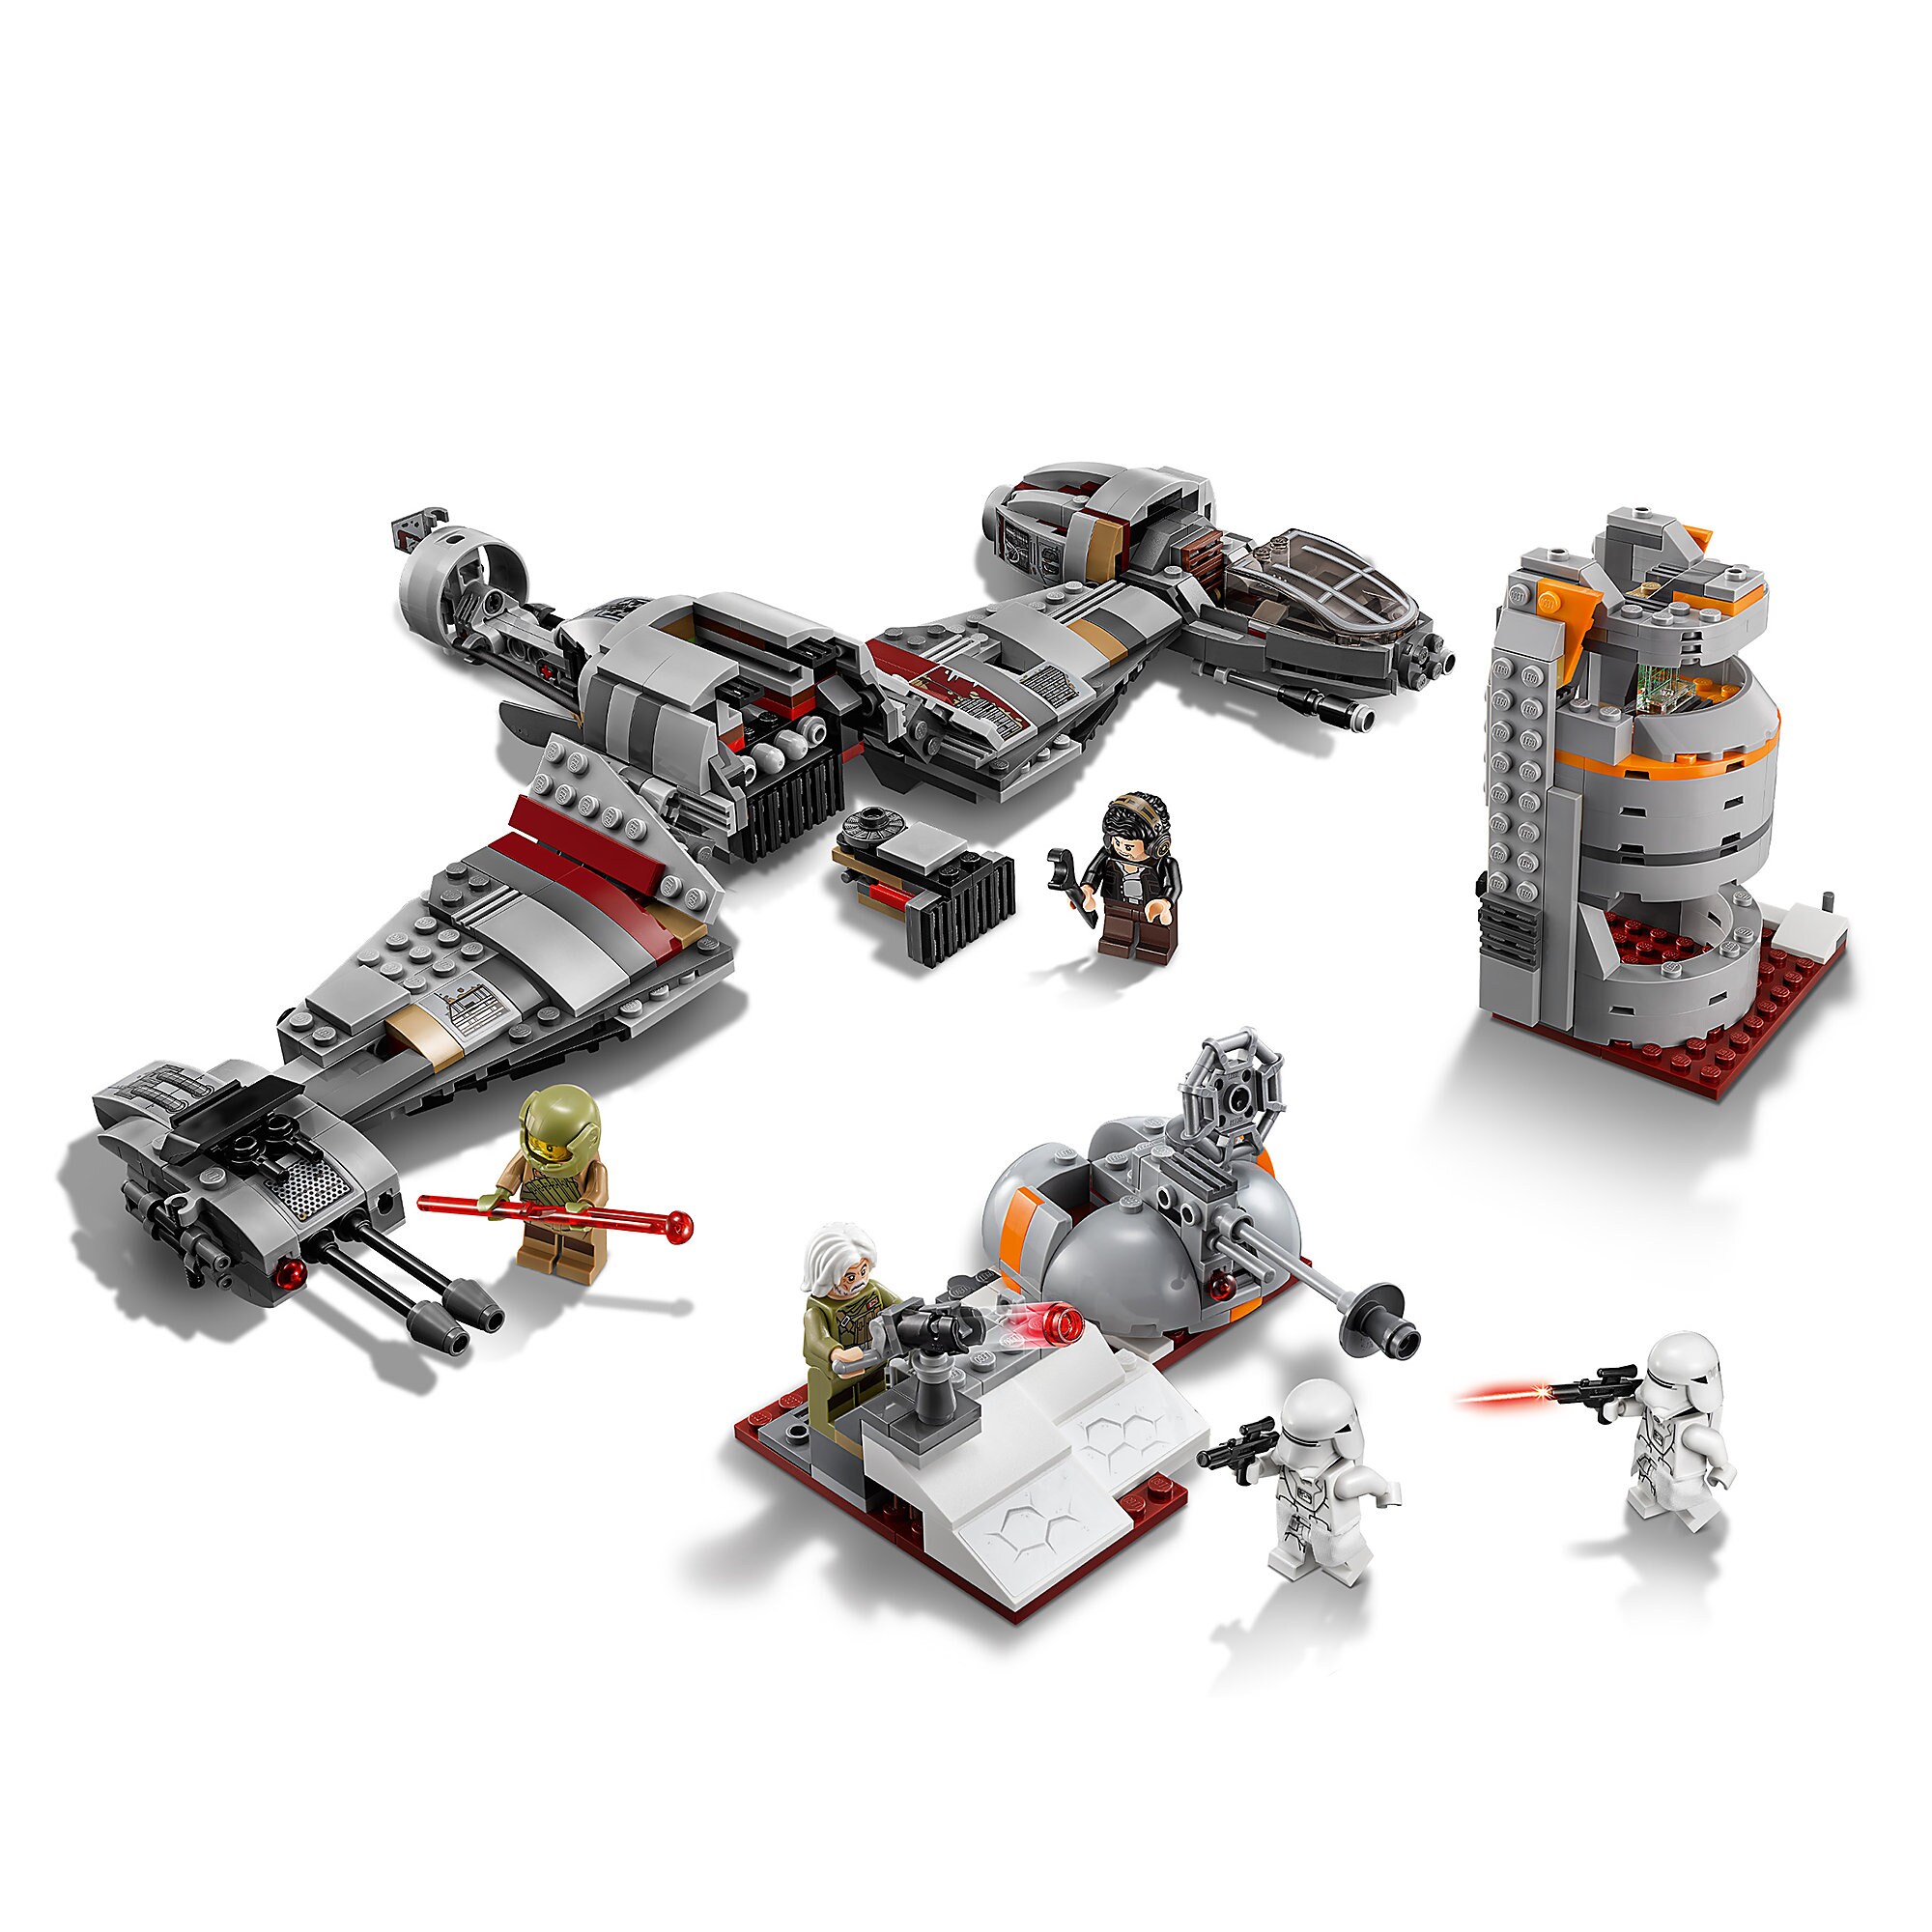 Defense of Crait Playset by LEGO - Star Wars: The Last Jedi